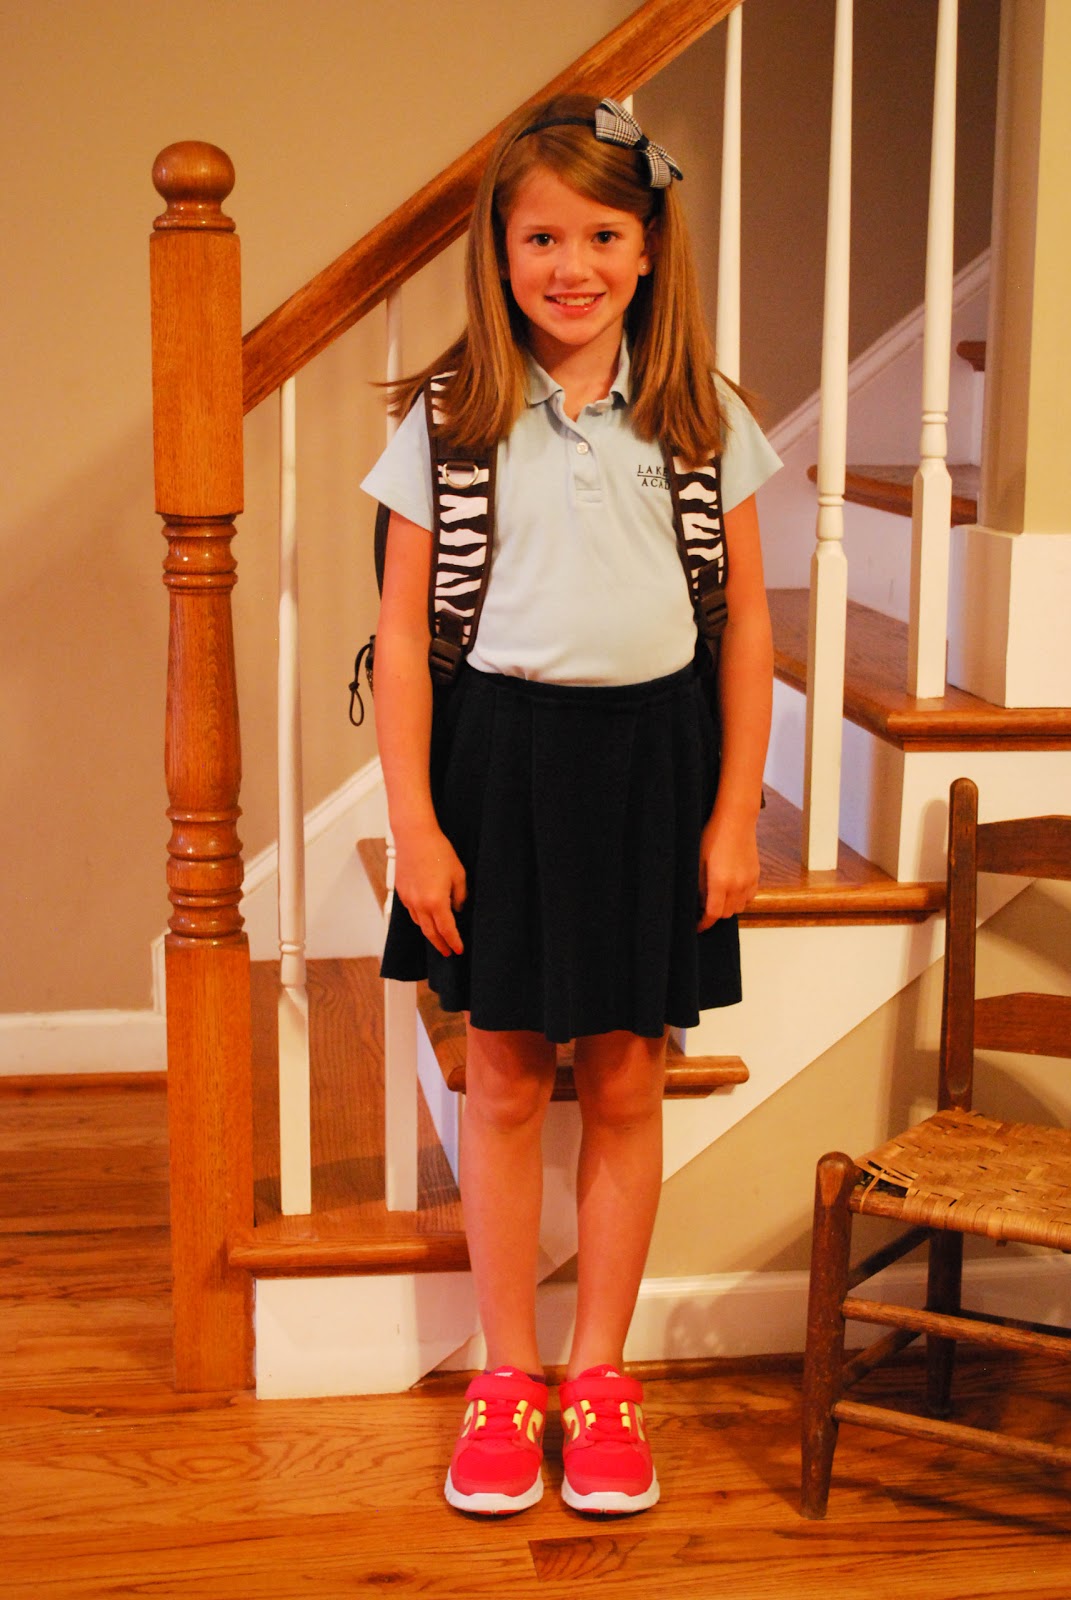 Shelly's Soapbox: Back to School: First Day of 3rd Grade